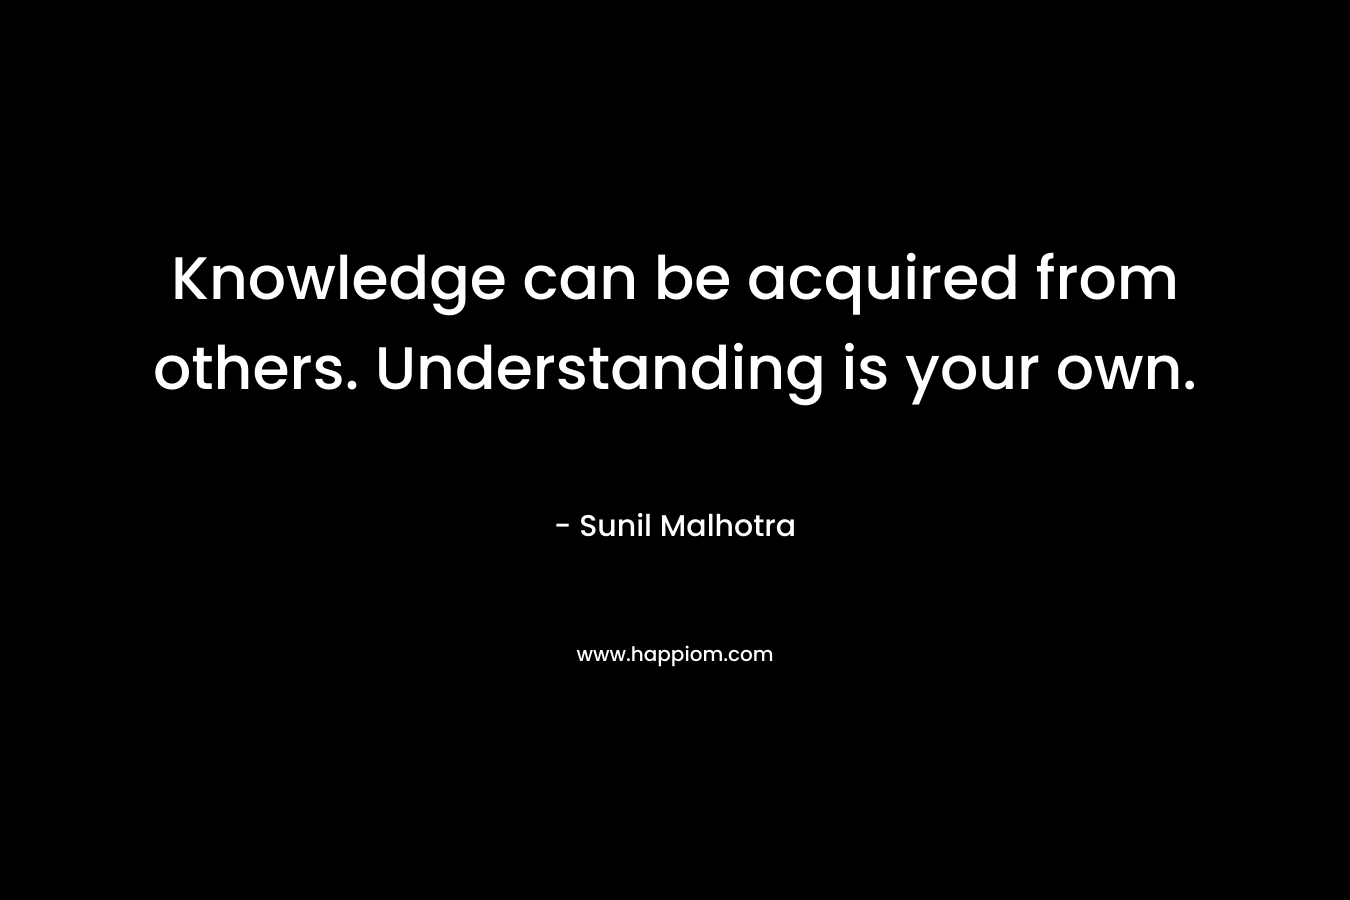 Knowledge can be acquired from others. Understanding is your own. – Sunil Malhotra